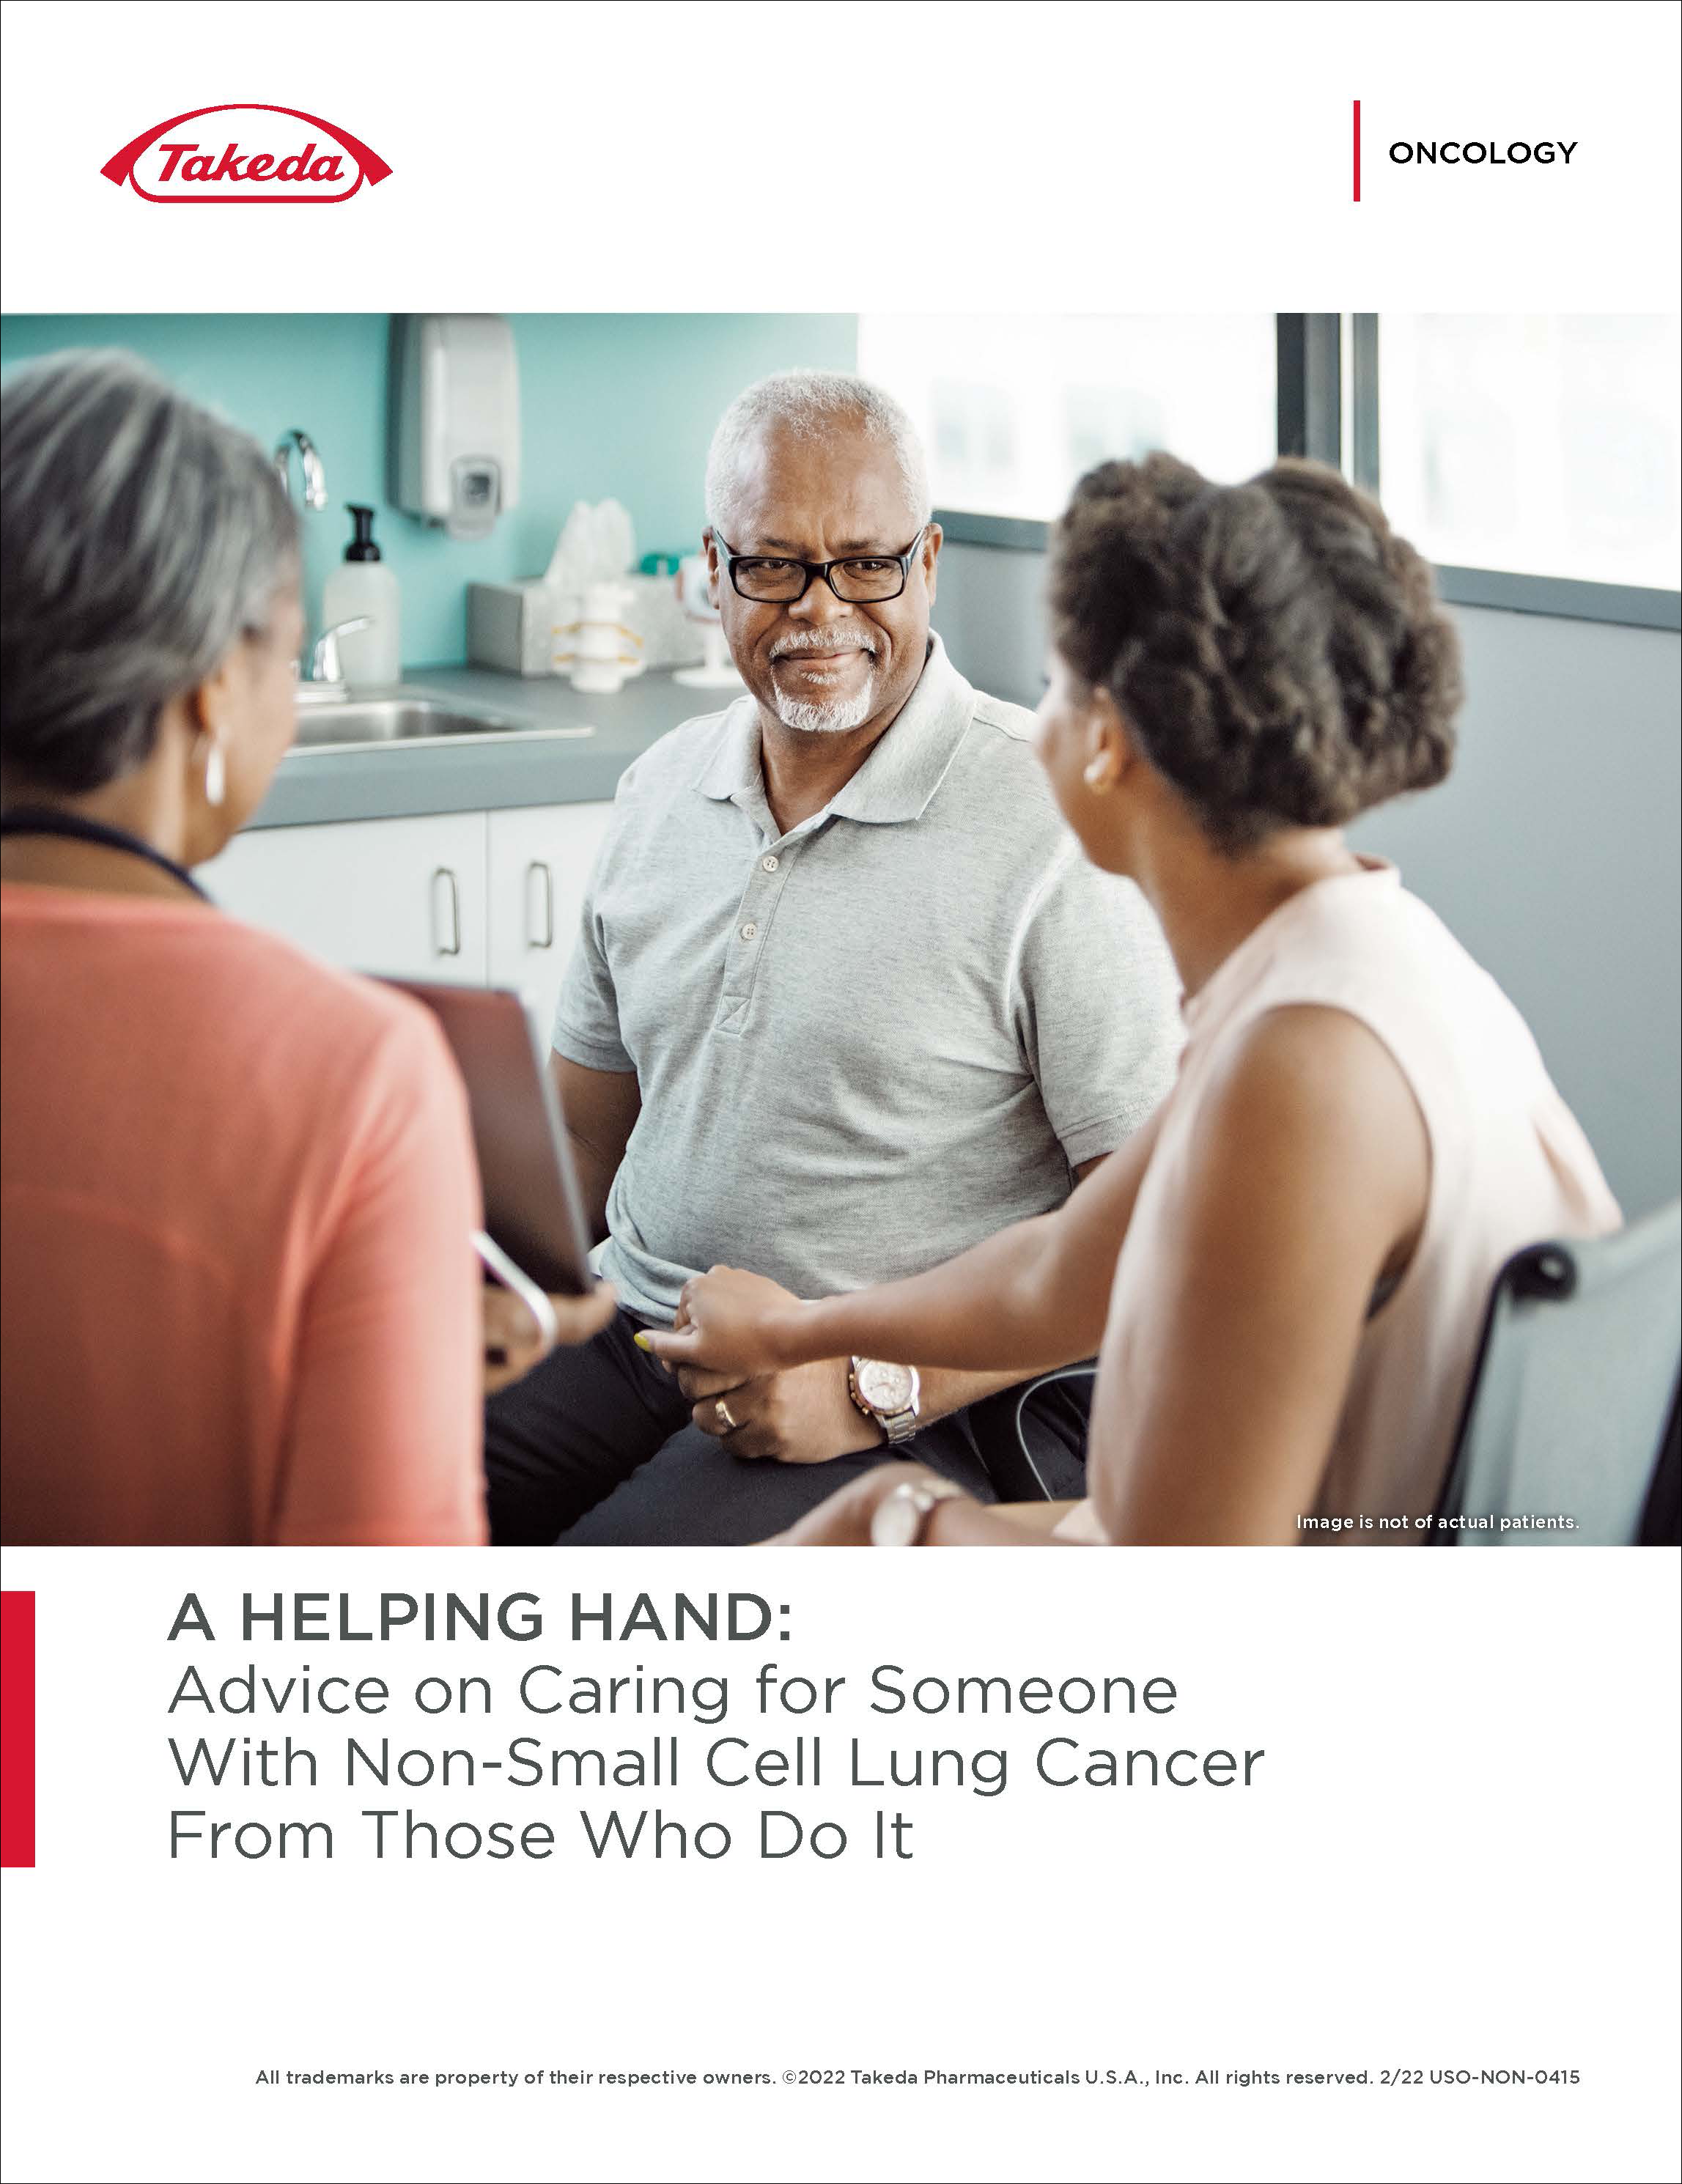 A HELPING HAND: Advice on Caring for Someone With Non-Small Cell Lung Cancer From Those Who Do It